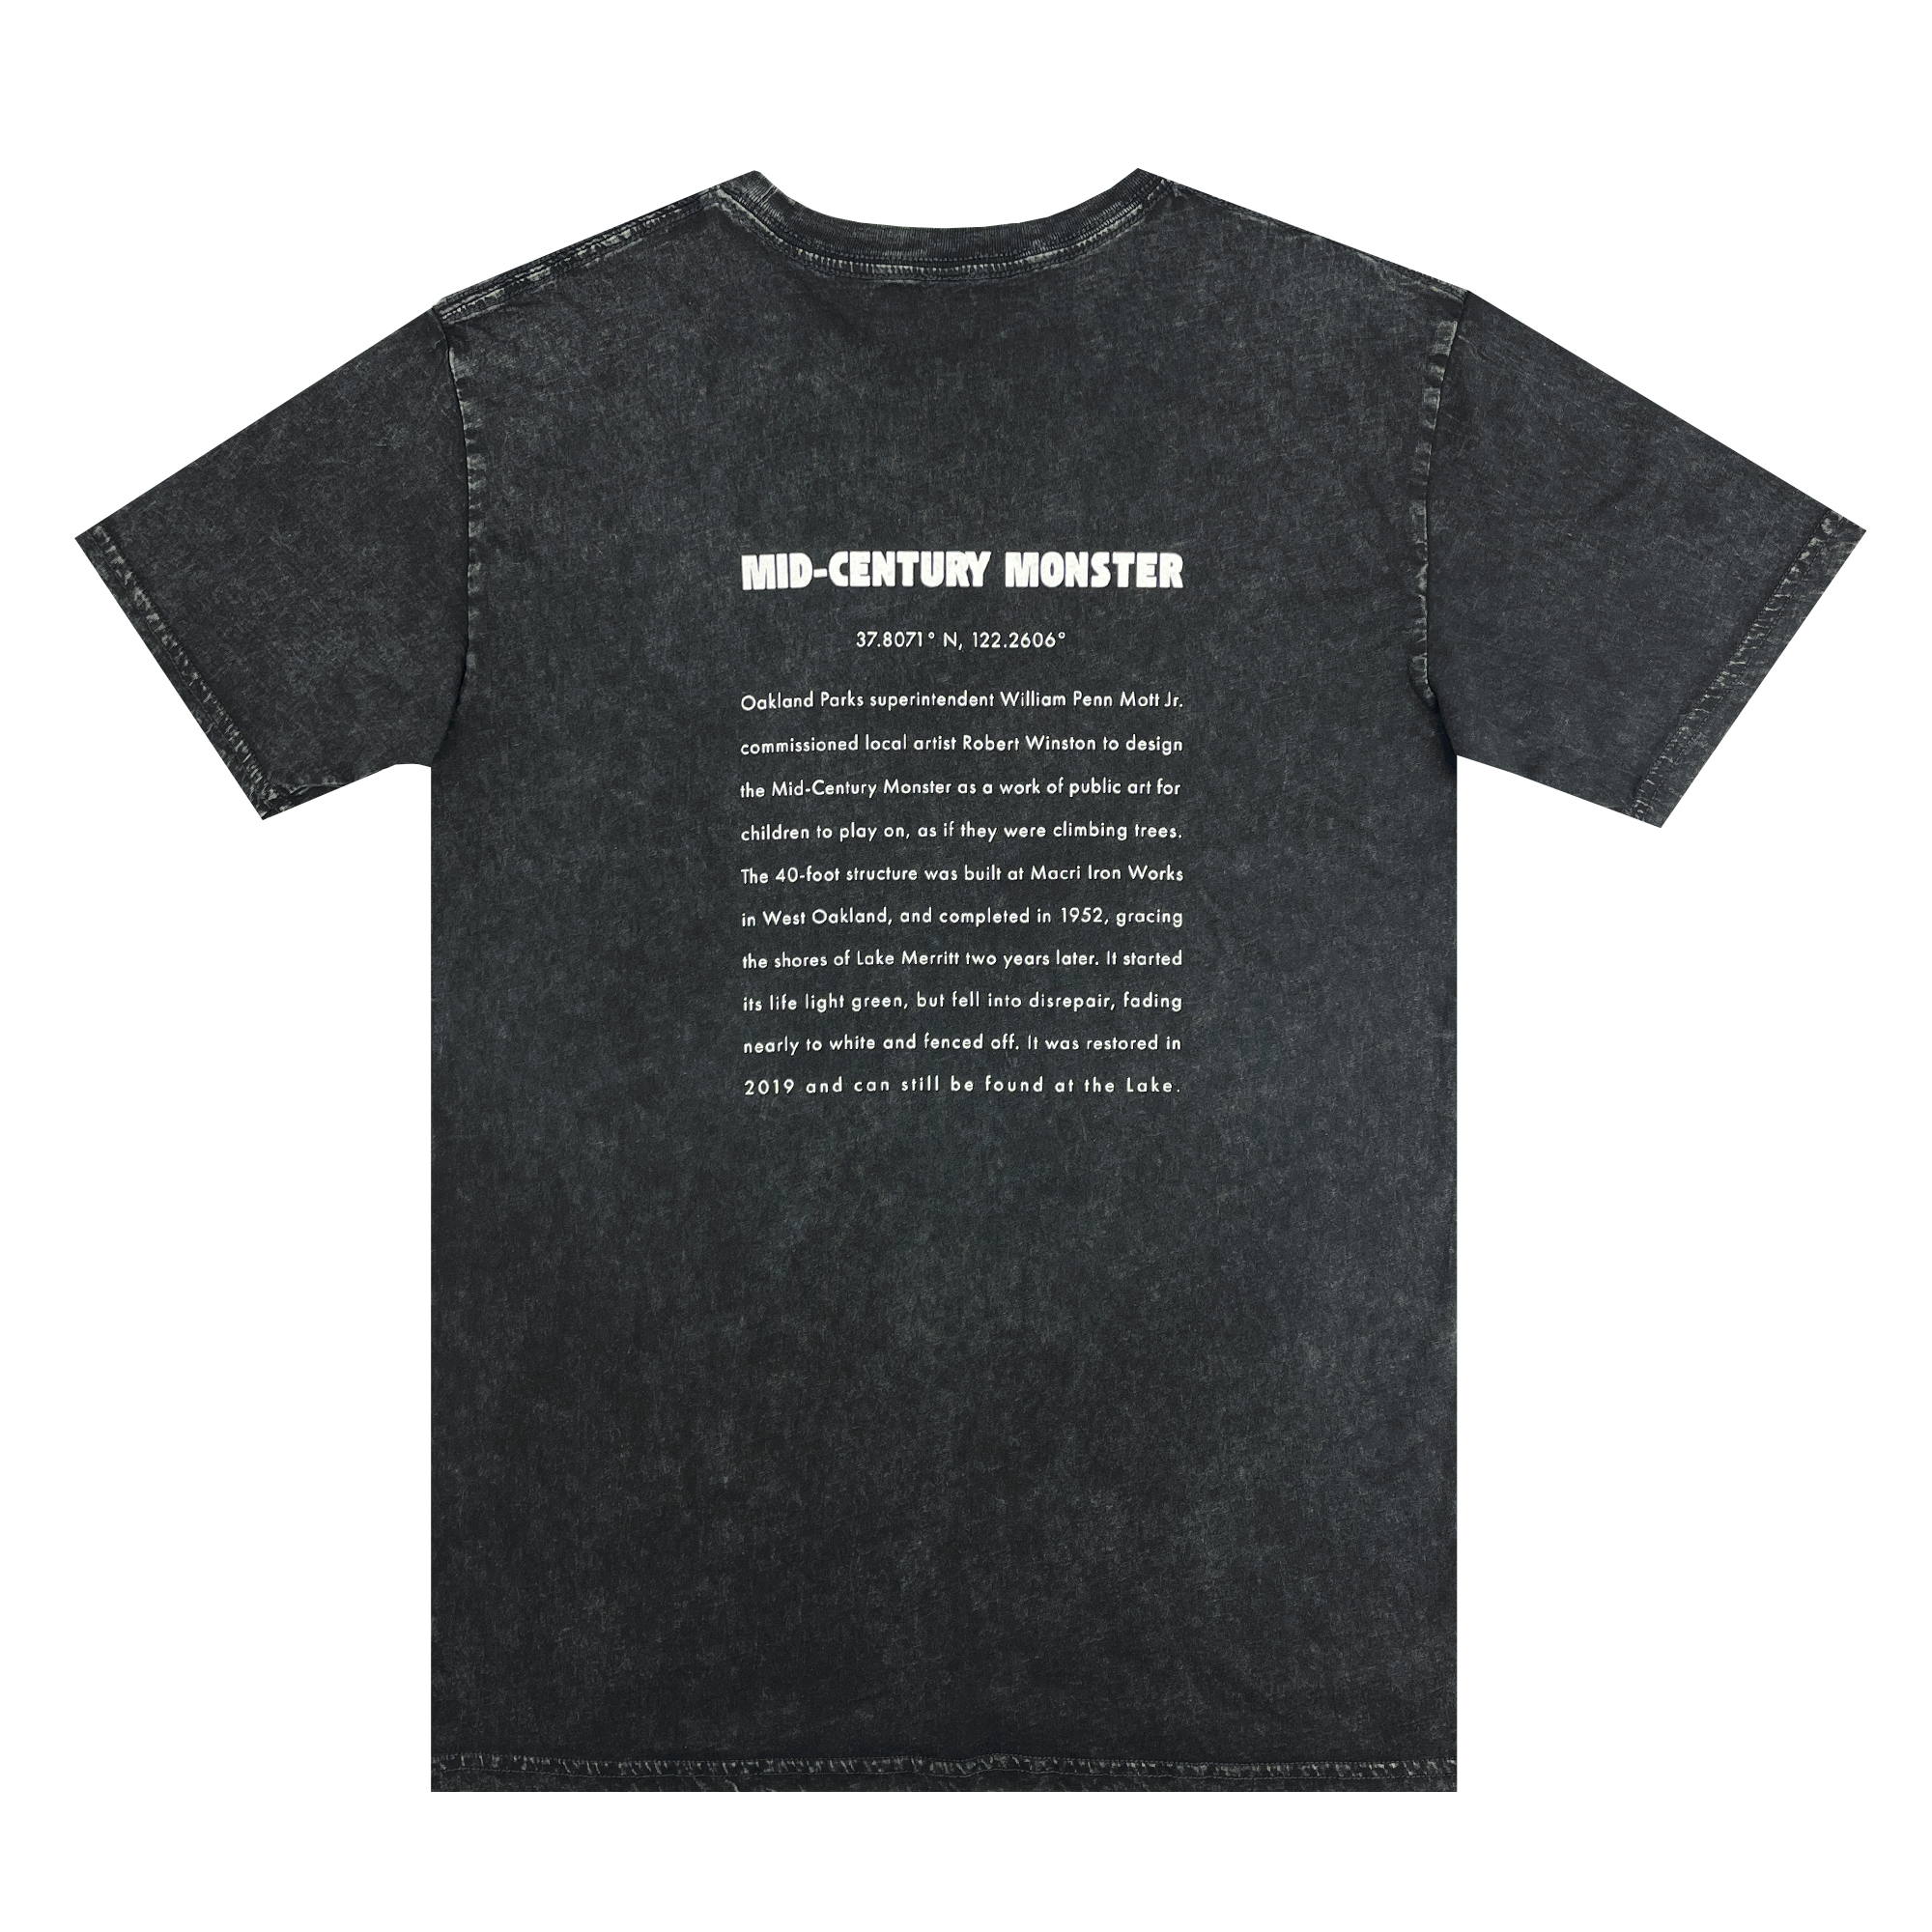 The backside of a black stone-colored t-shirt with long-form text explaining the history of the mid-century monster structure at Oaklands Marci Iron Works.